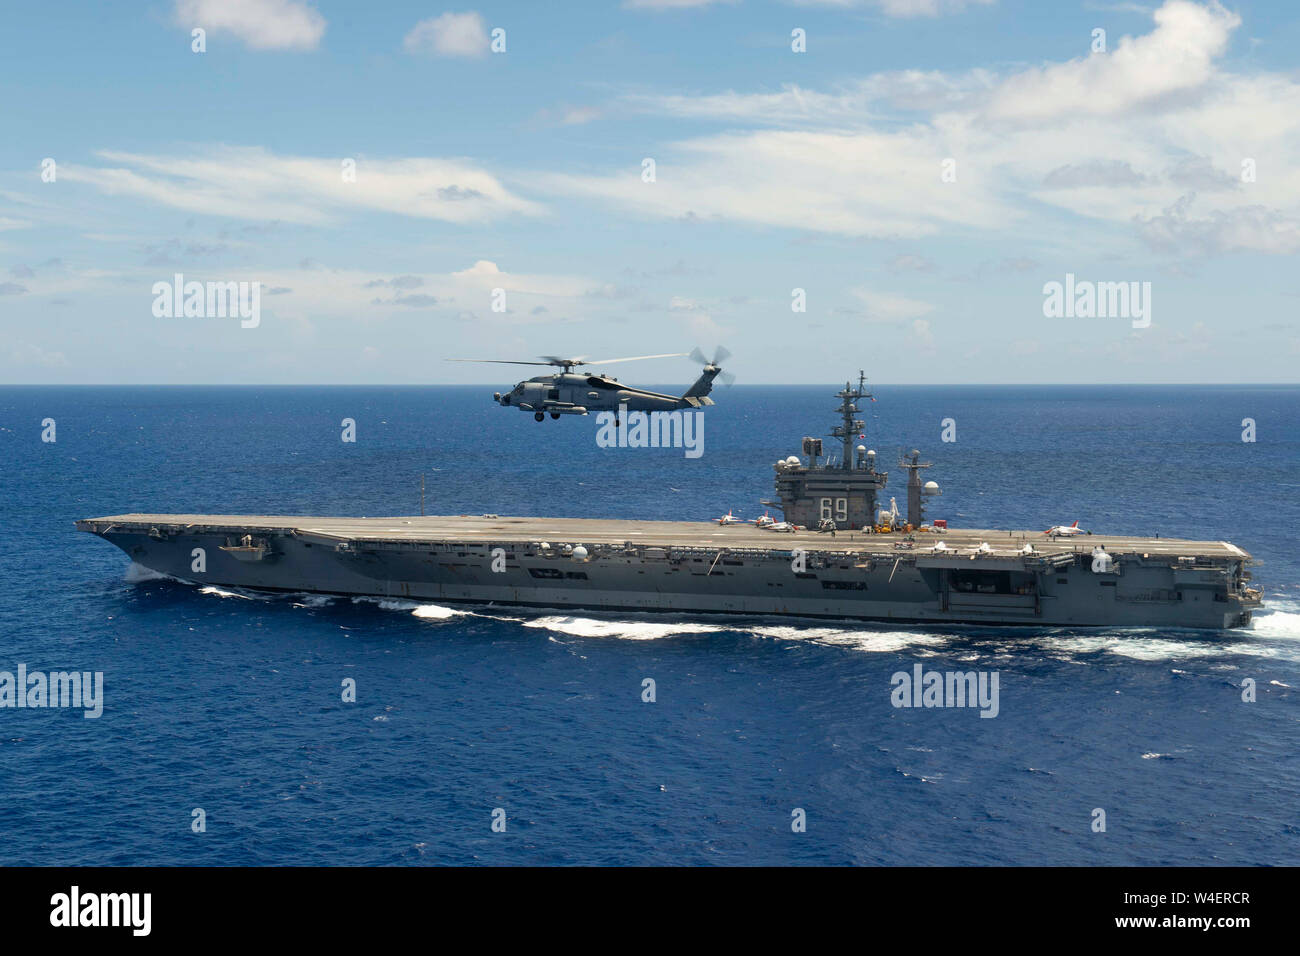 190716-N-KT825-0247  ATLANTIC OCEAN (July 16, 2019) The aircraft carrier USS Dwight D. Eisenhower (CVN 69) transits the Atlantic Ocean. Ike is underway in the Atlantic Ocean conducting carrier qualifications while in the basic phase of the Optimized Fleet Response Plan. (U.S. Navy photo by Mass Communication Specialist 3rd Class Sawyer Haskins/Released) Stock Photo